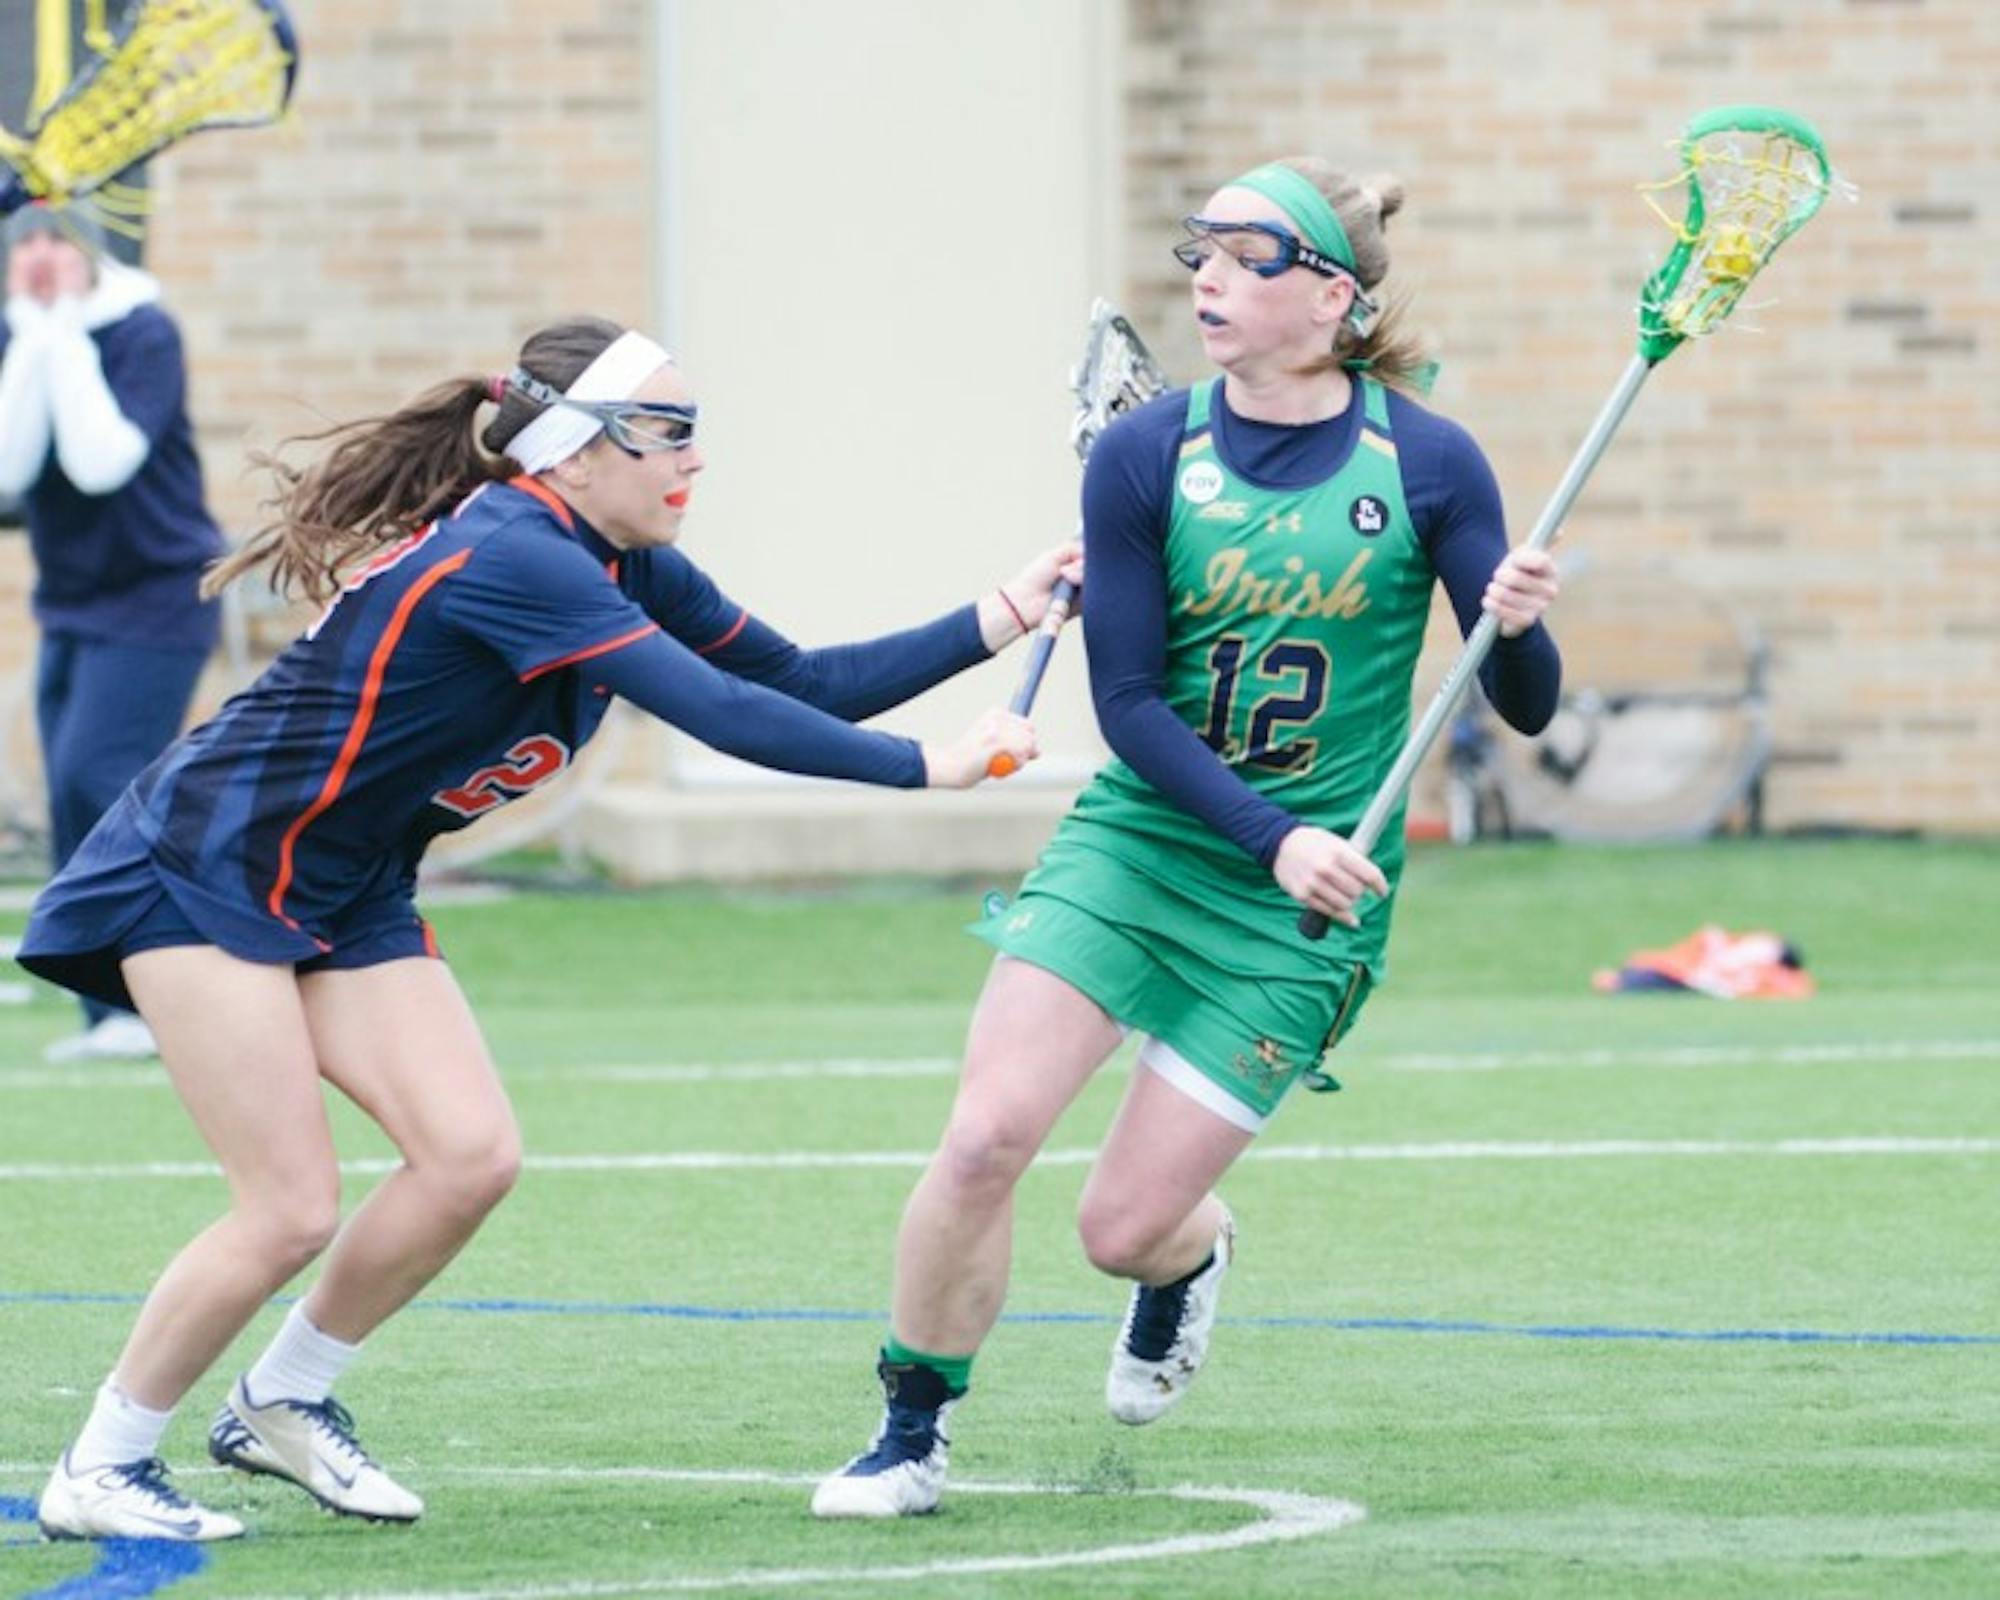 Irish junior midfielder Alex Dalton looks to pass in Notre Dame’s 16-4 win over Virginia on March 19 at Arlotta Stadium.  Dalton scored two goals in the first ten minutes of the game against Syracuse.